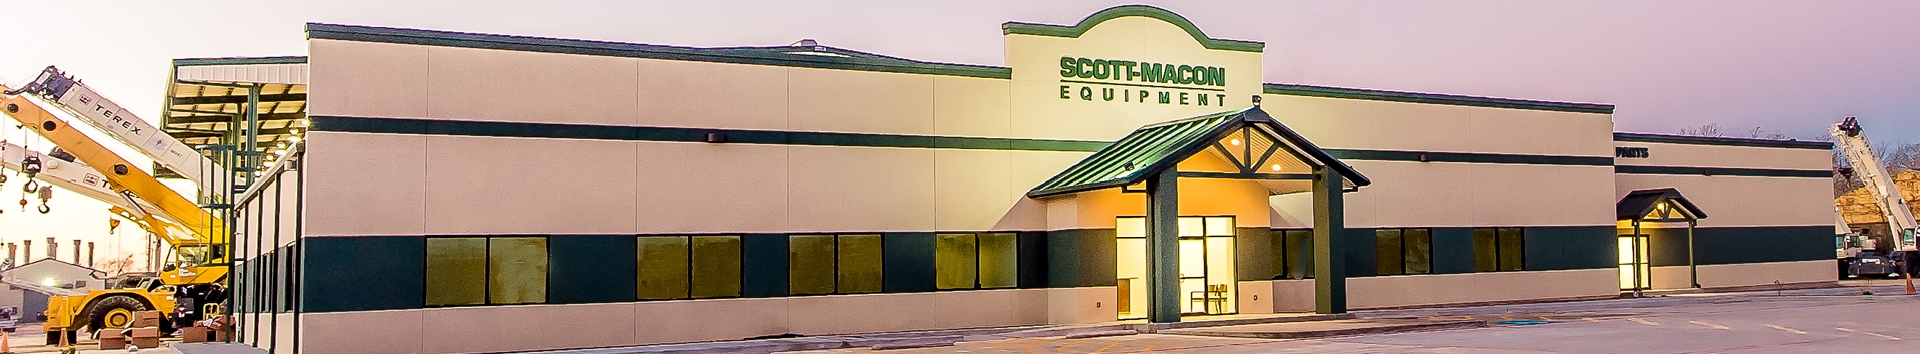 Blog - Scott-Macon Equipment is a leading crane and lifting equipment company in the Southern region of the United States